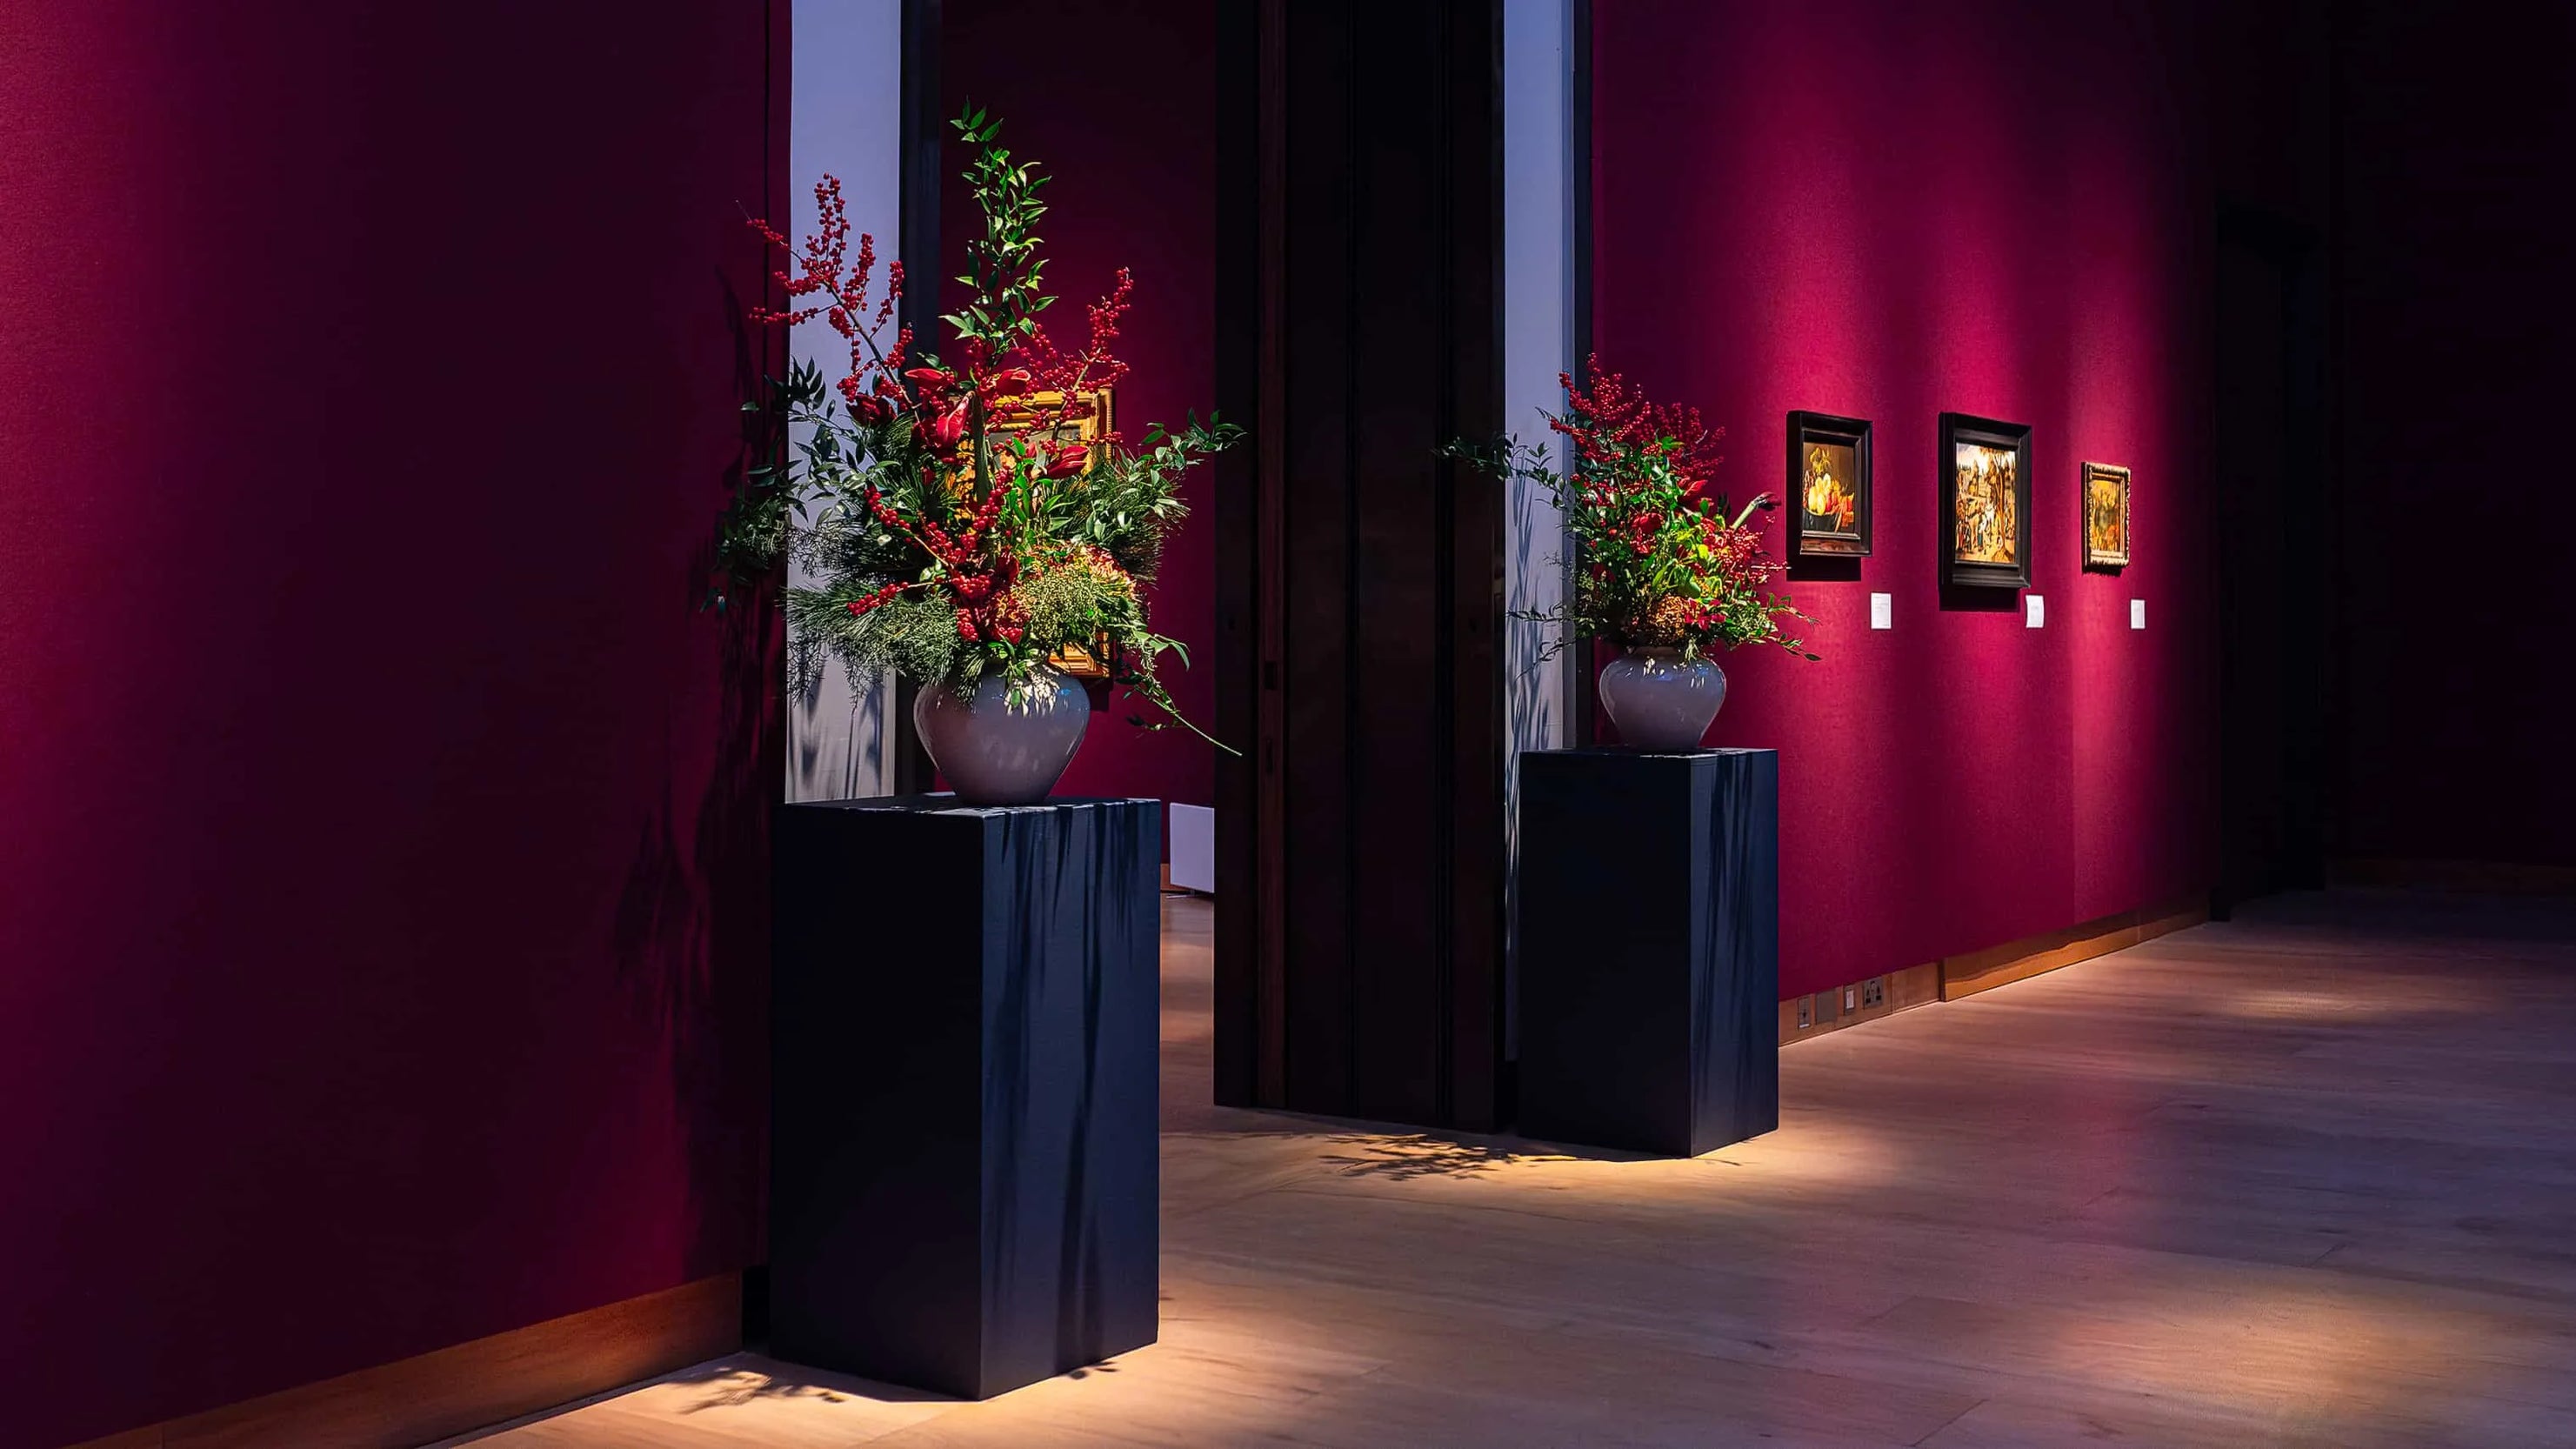 Custom Christmas floral creations in purple vases featured under spotlights in the hallroom at Christie's